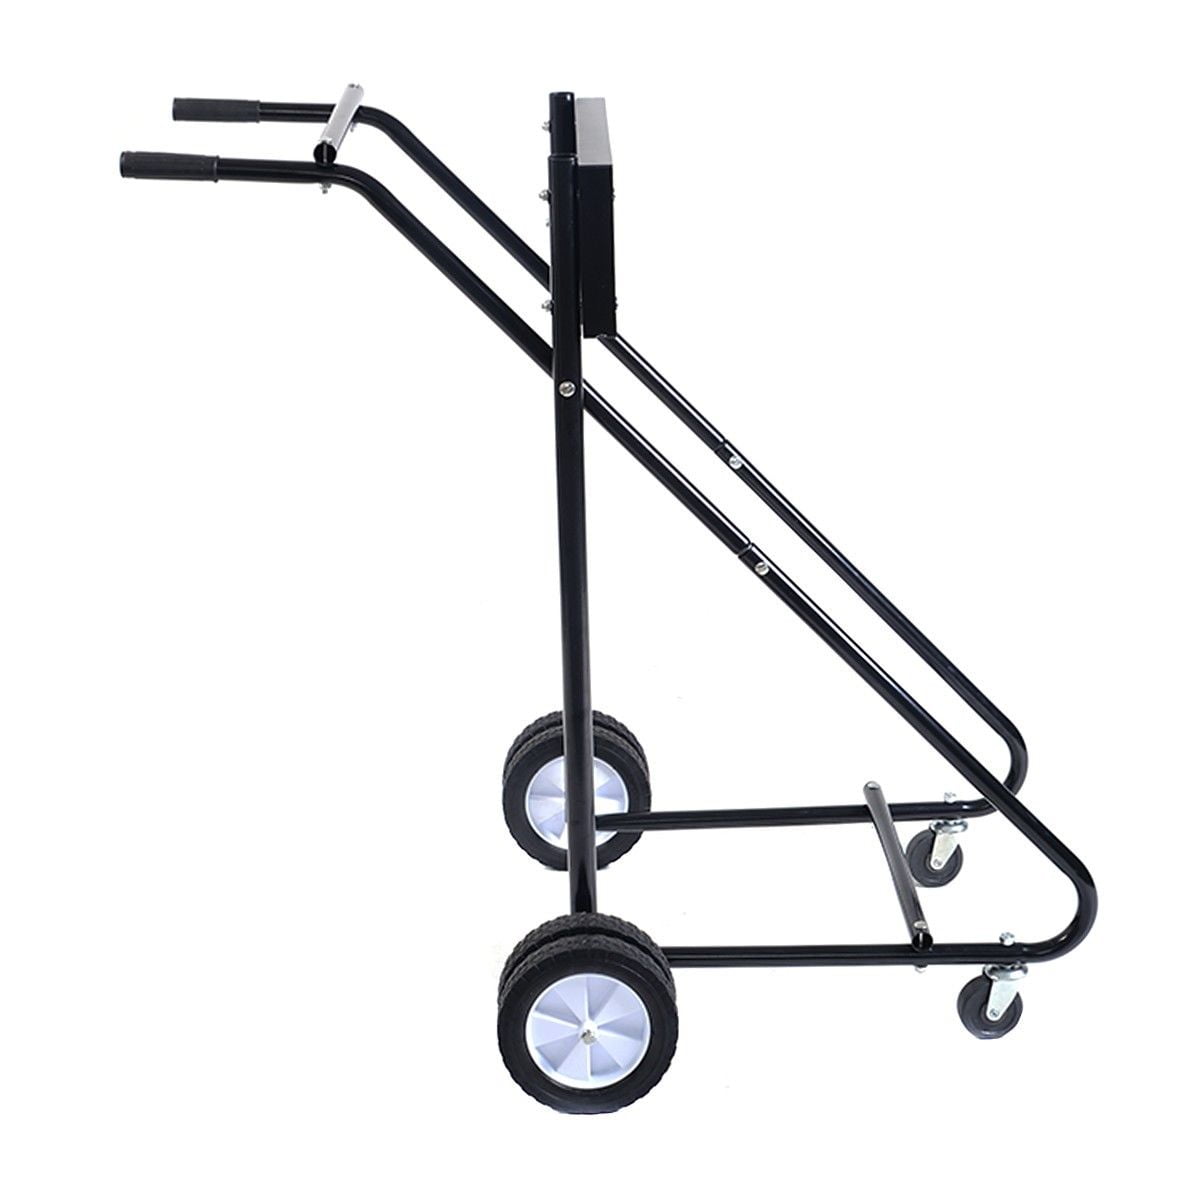 Cloud Rising 315 LBS Outboard Motor Stand Heavy Duty Pro Outboard Engine Carrier Cart 